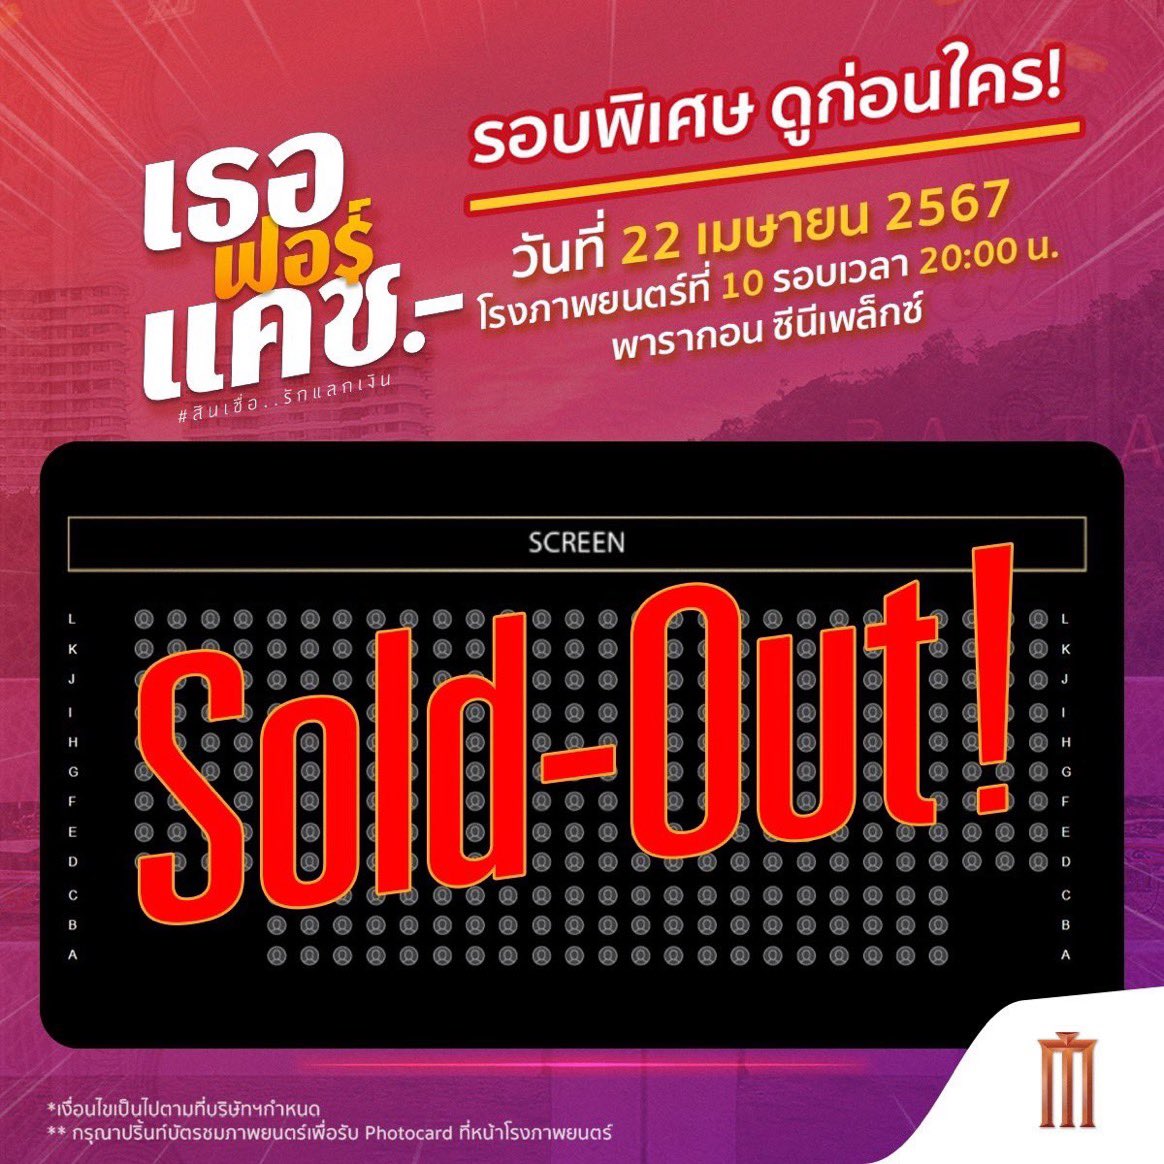 Sold out, don't believe it! Sold-Out!

#LoveYouToDebt on April 22, the 10th cinema at 8:00 p.m. Paragon Cineplex, see you there!

#เธอฟอร์แคช
#bbrightvc